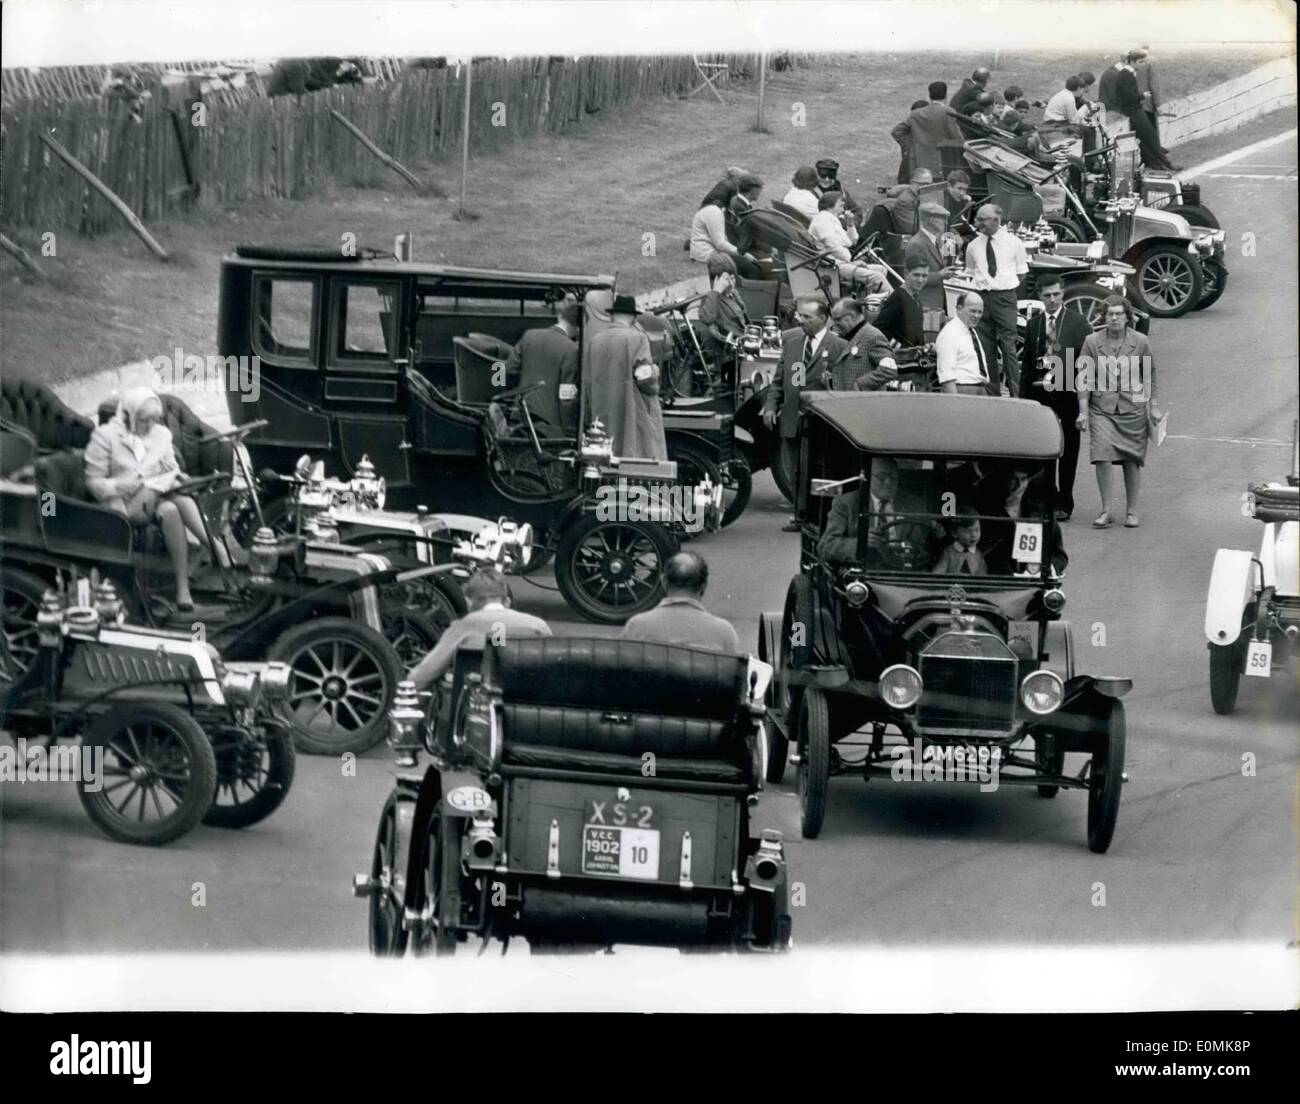 Jul. 07, 1955 - Veteran Car Rally At Crystal Place: A magnificent array of some of the earliest motor vehicles, assembled yesterday at Crystal Palace, during the London Veteran car rally. Photo Shows A 1915 (No. 69), driven by A. Macintosh, of Buckingham, Kent, passing a 1902 (No.10) Arrol-Johnstone, driven by N.R. Cole, in front of some of the veteran cars at yesterday's rally. Stock Photo